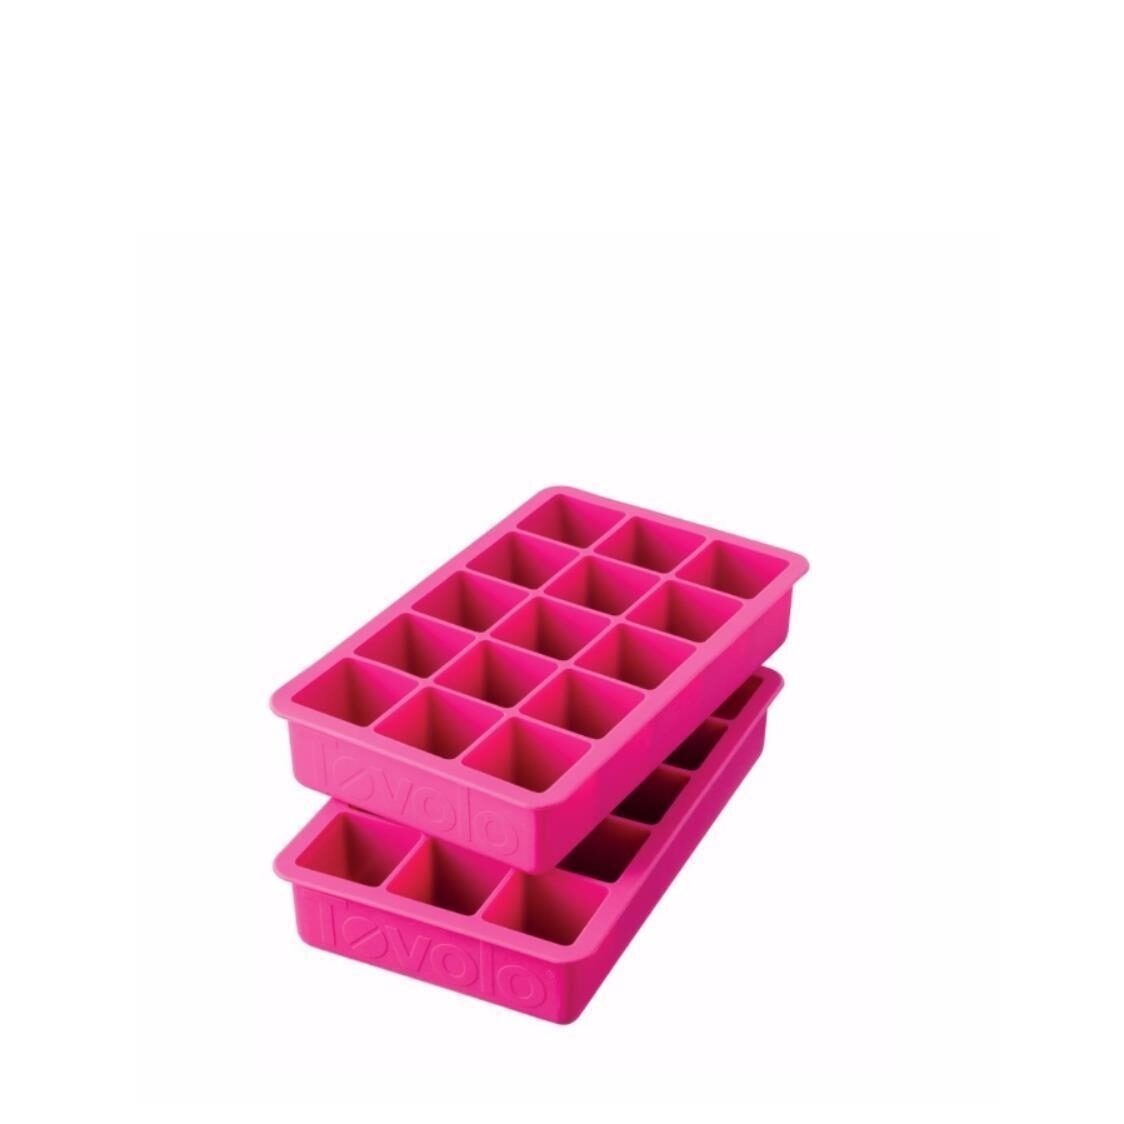 https://media.metro.sg/ProductImages/bf0ce26e-749a-4677-a37c-e481d9b711c3/1/std/tovolo-perfect-cube-ice-trays-set-of-2-221130094052.jpg